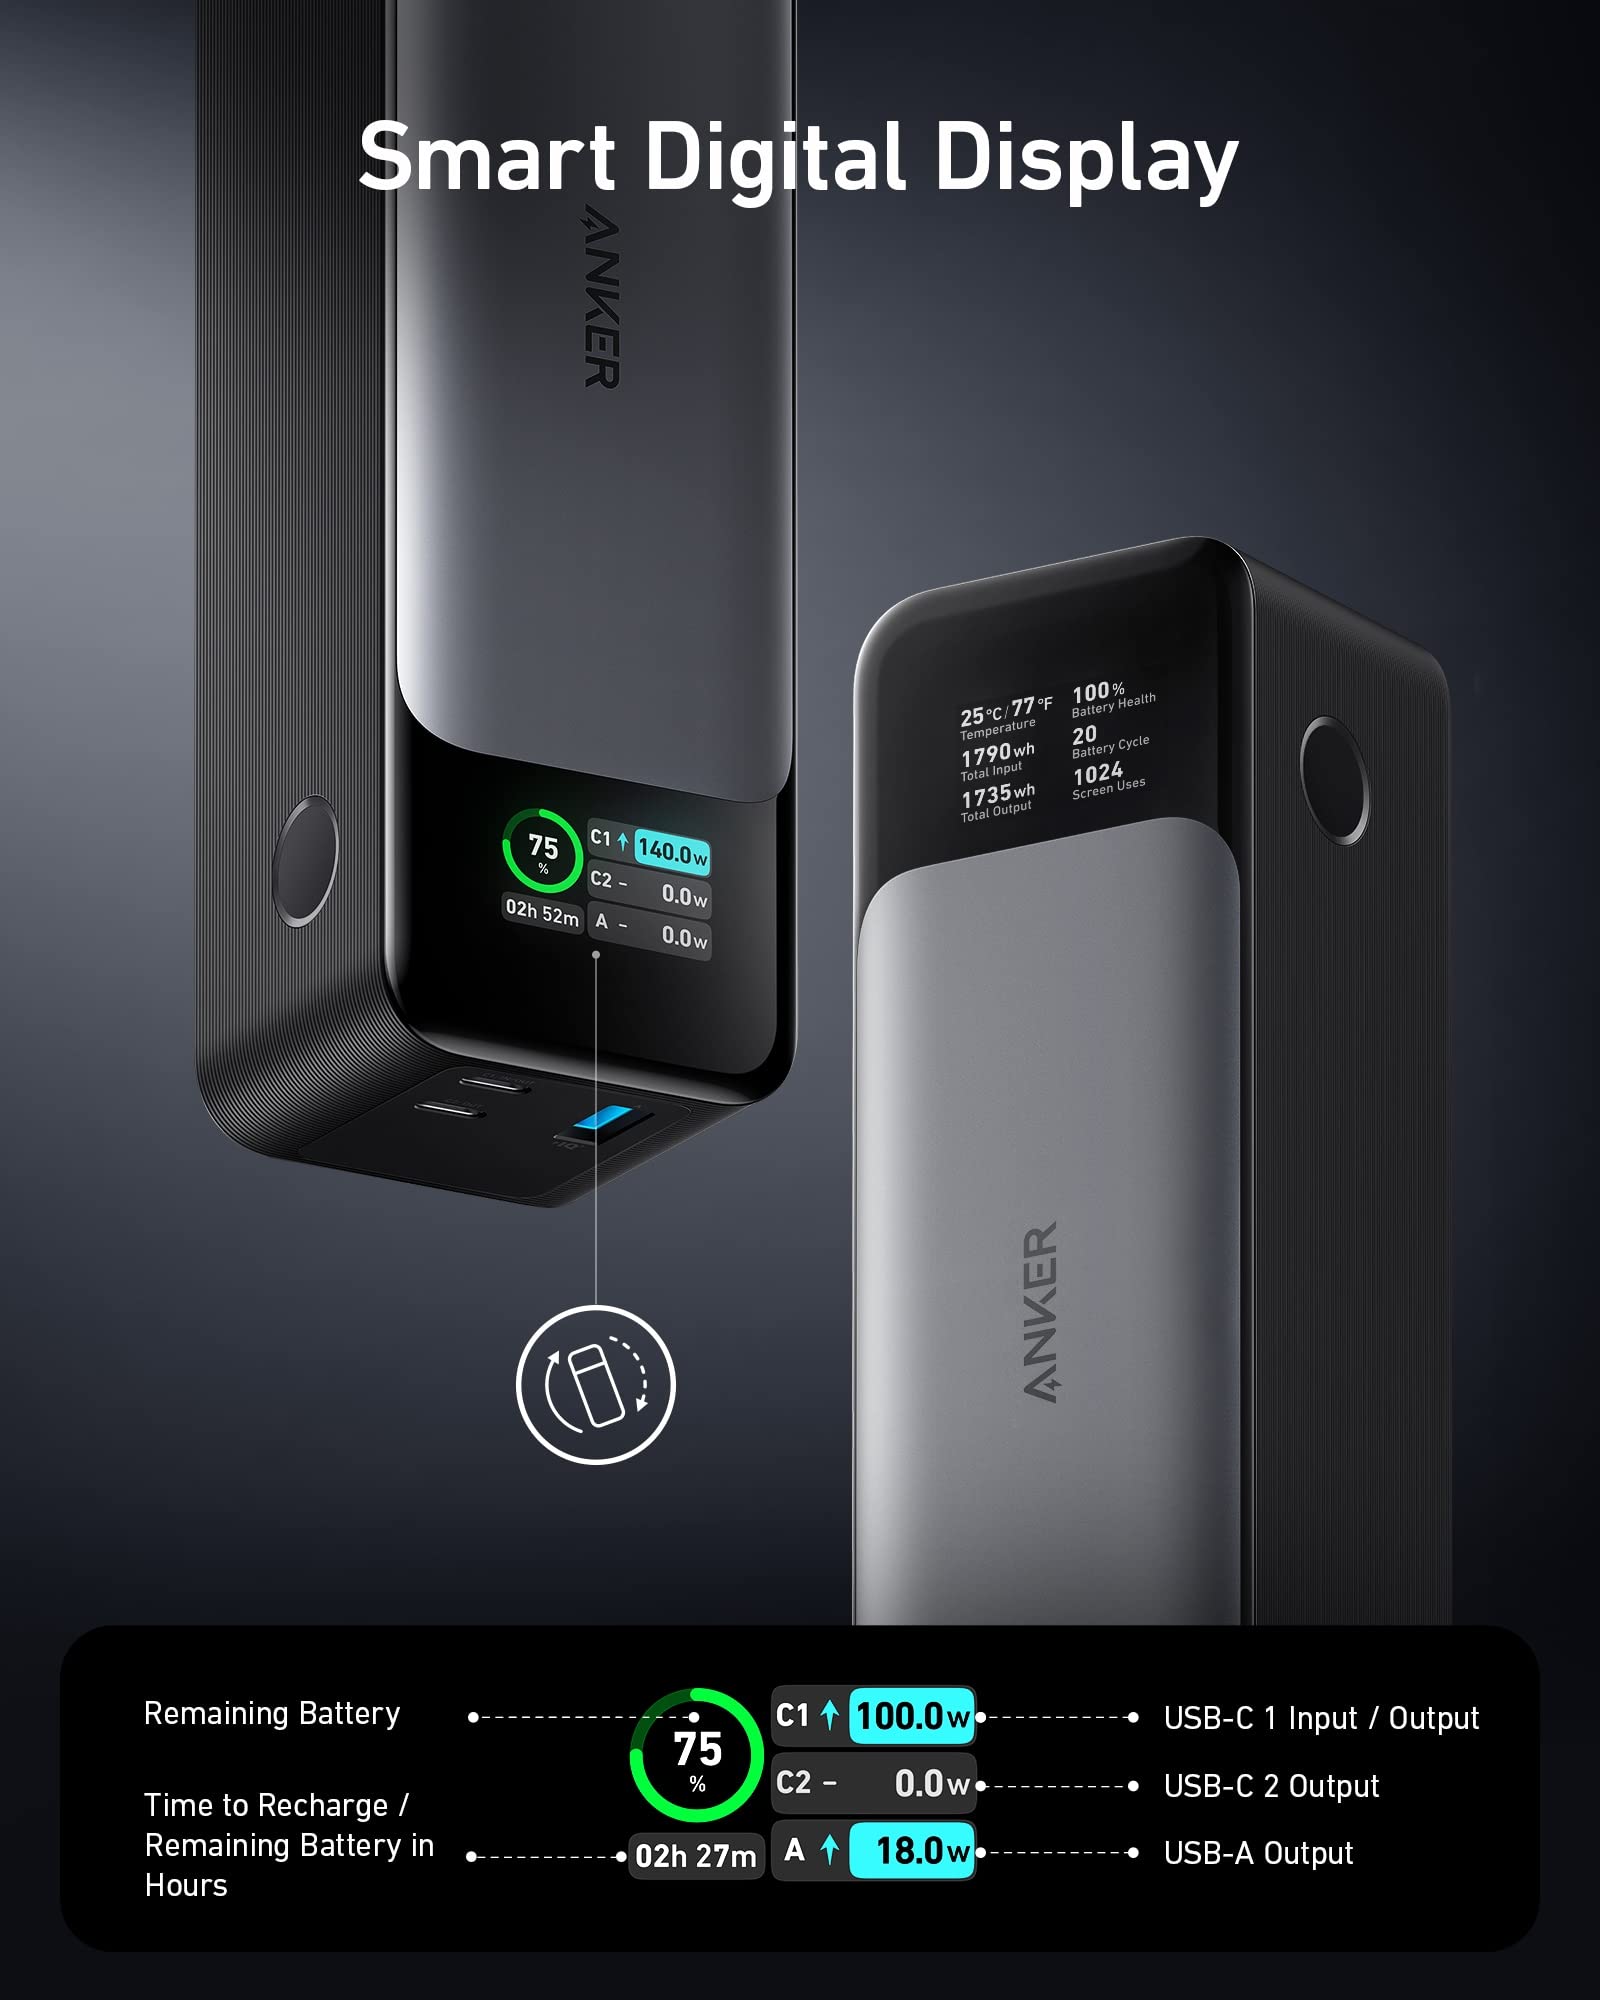 Anker Power Bank, 24,000mAh 3-Port Portable Charger with 140W Output, 737 (PowerCore 24K), Smart Digital Display, Compatible with iPhone 15/14/13 Series, Samsung, Dell, AirPods, and More